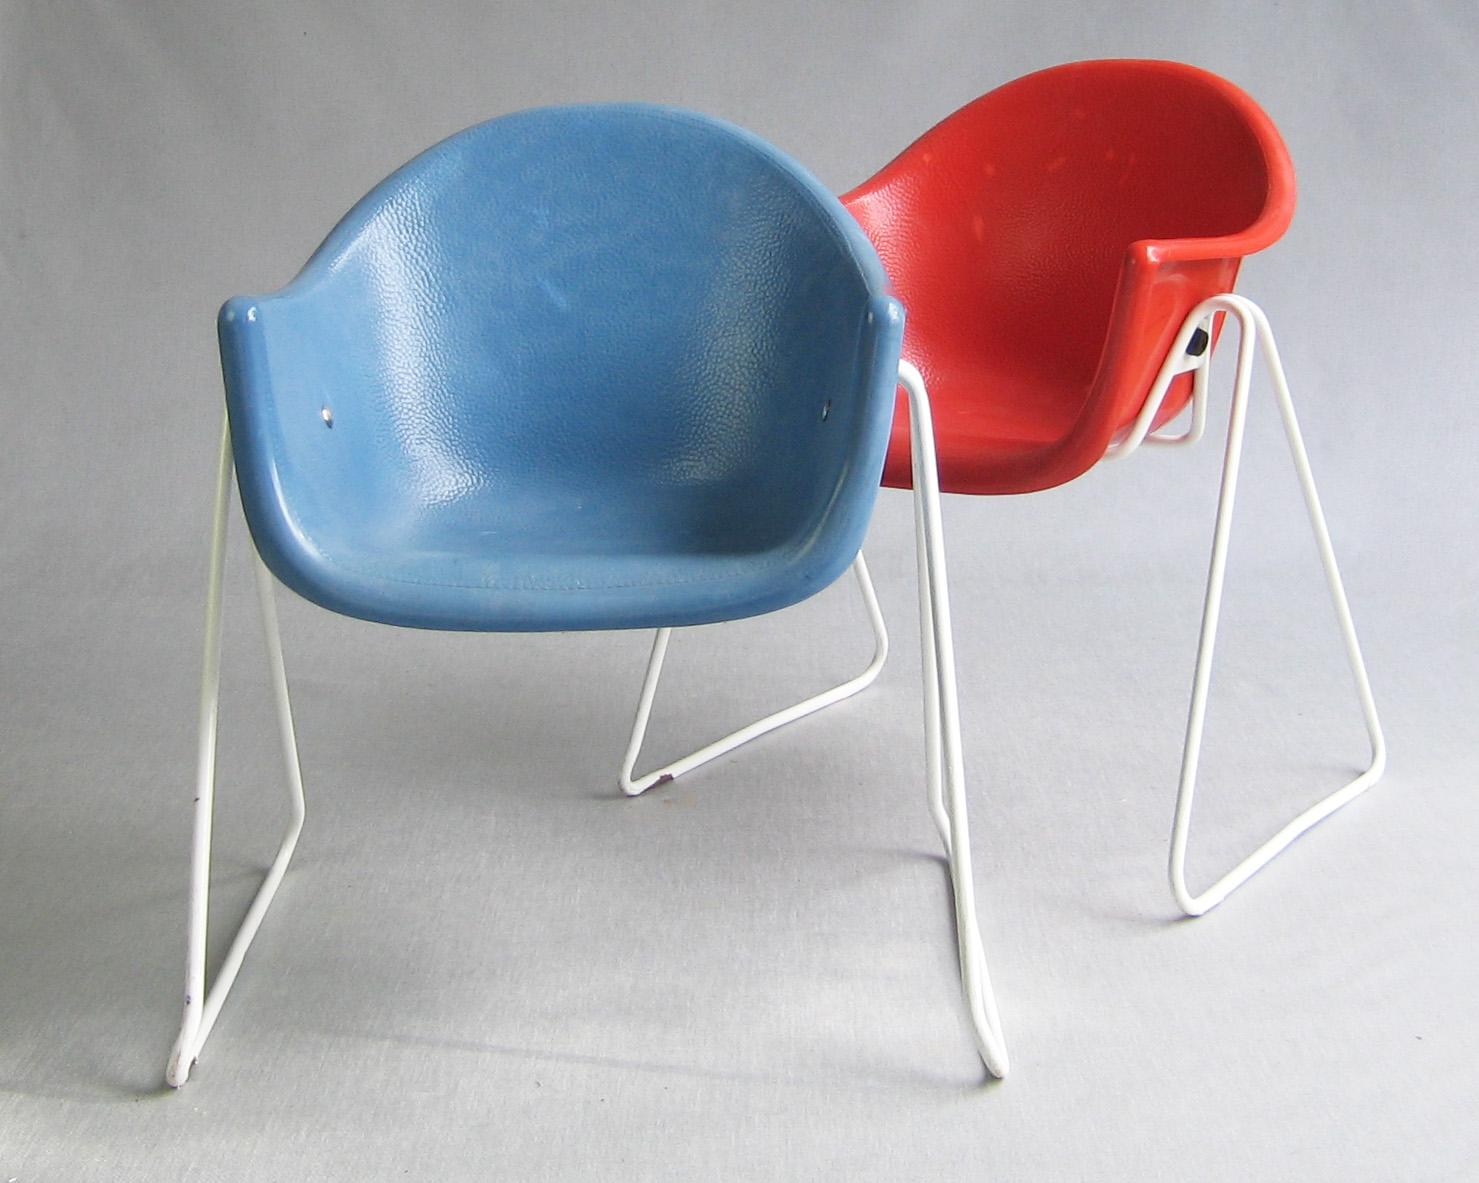 Metal Pair of Walter Papst kids chairs, Wilkhahn, Germany 1961 - 1968 For Sale